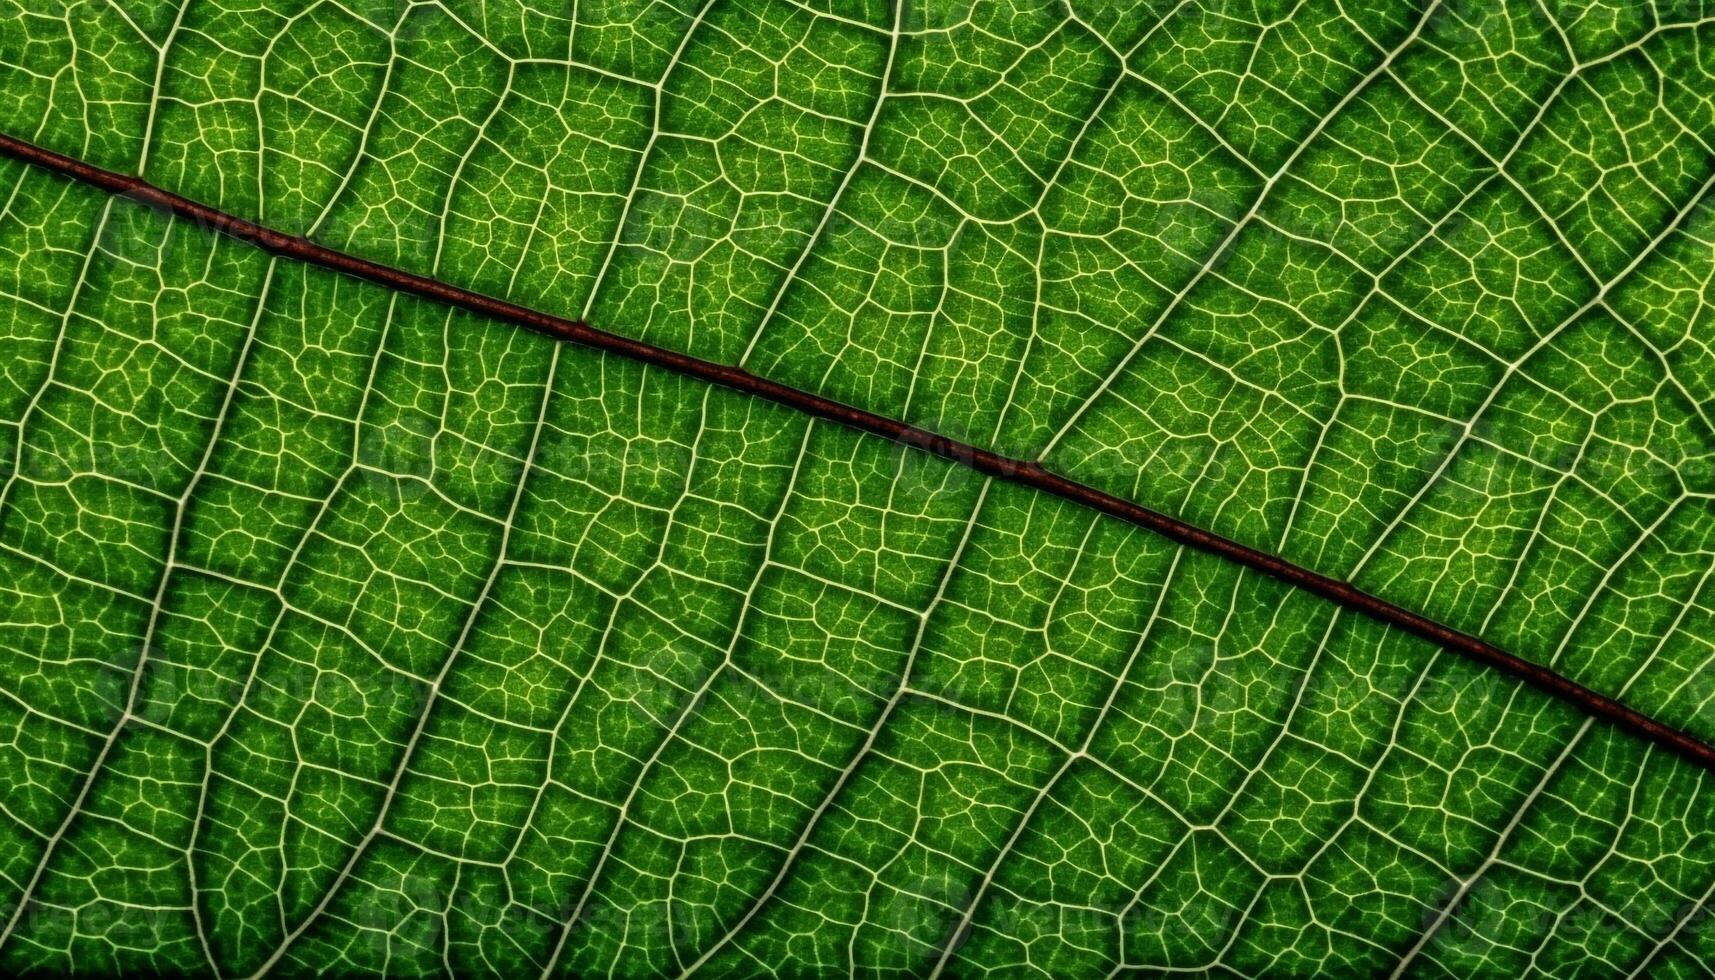 Vibrant leaf pattern showcases beauty in nature organic symmetry generated by AI photo